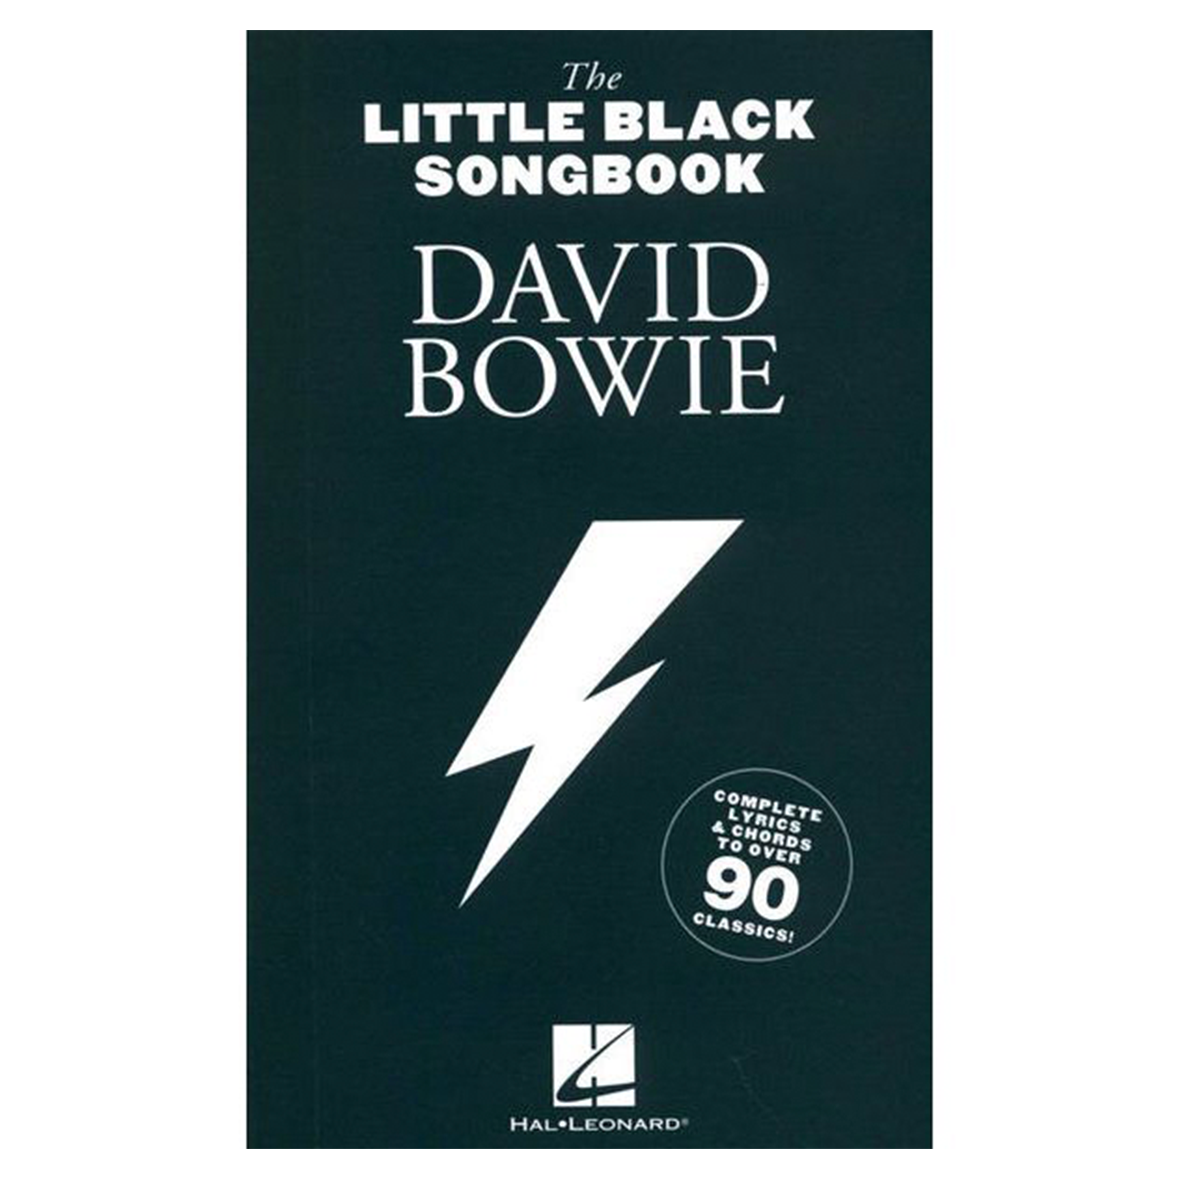 The Little Black Songbook David Bowie